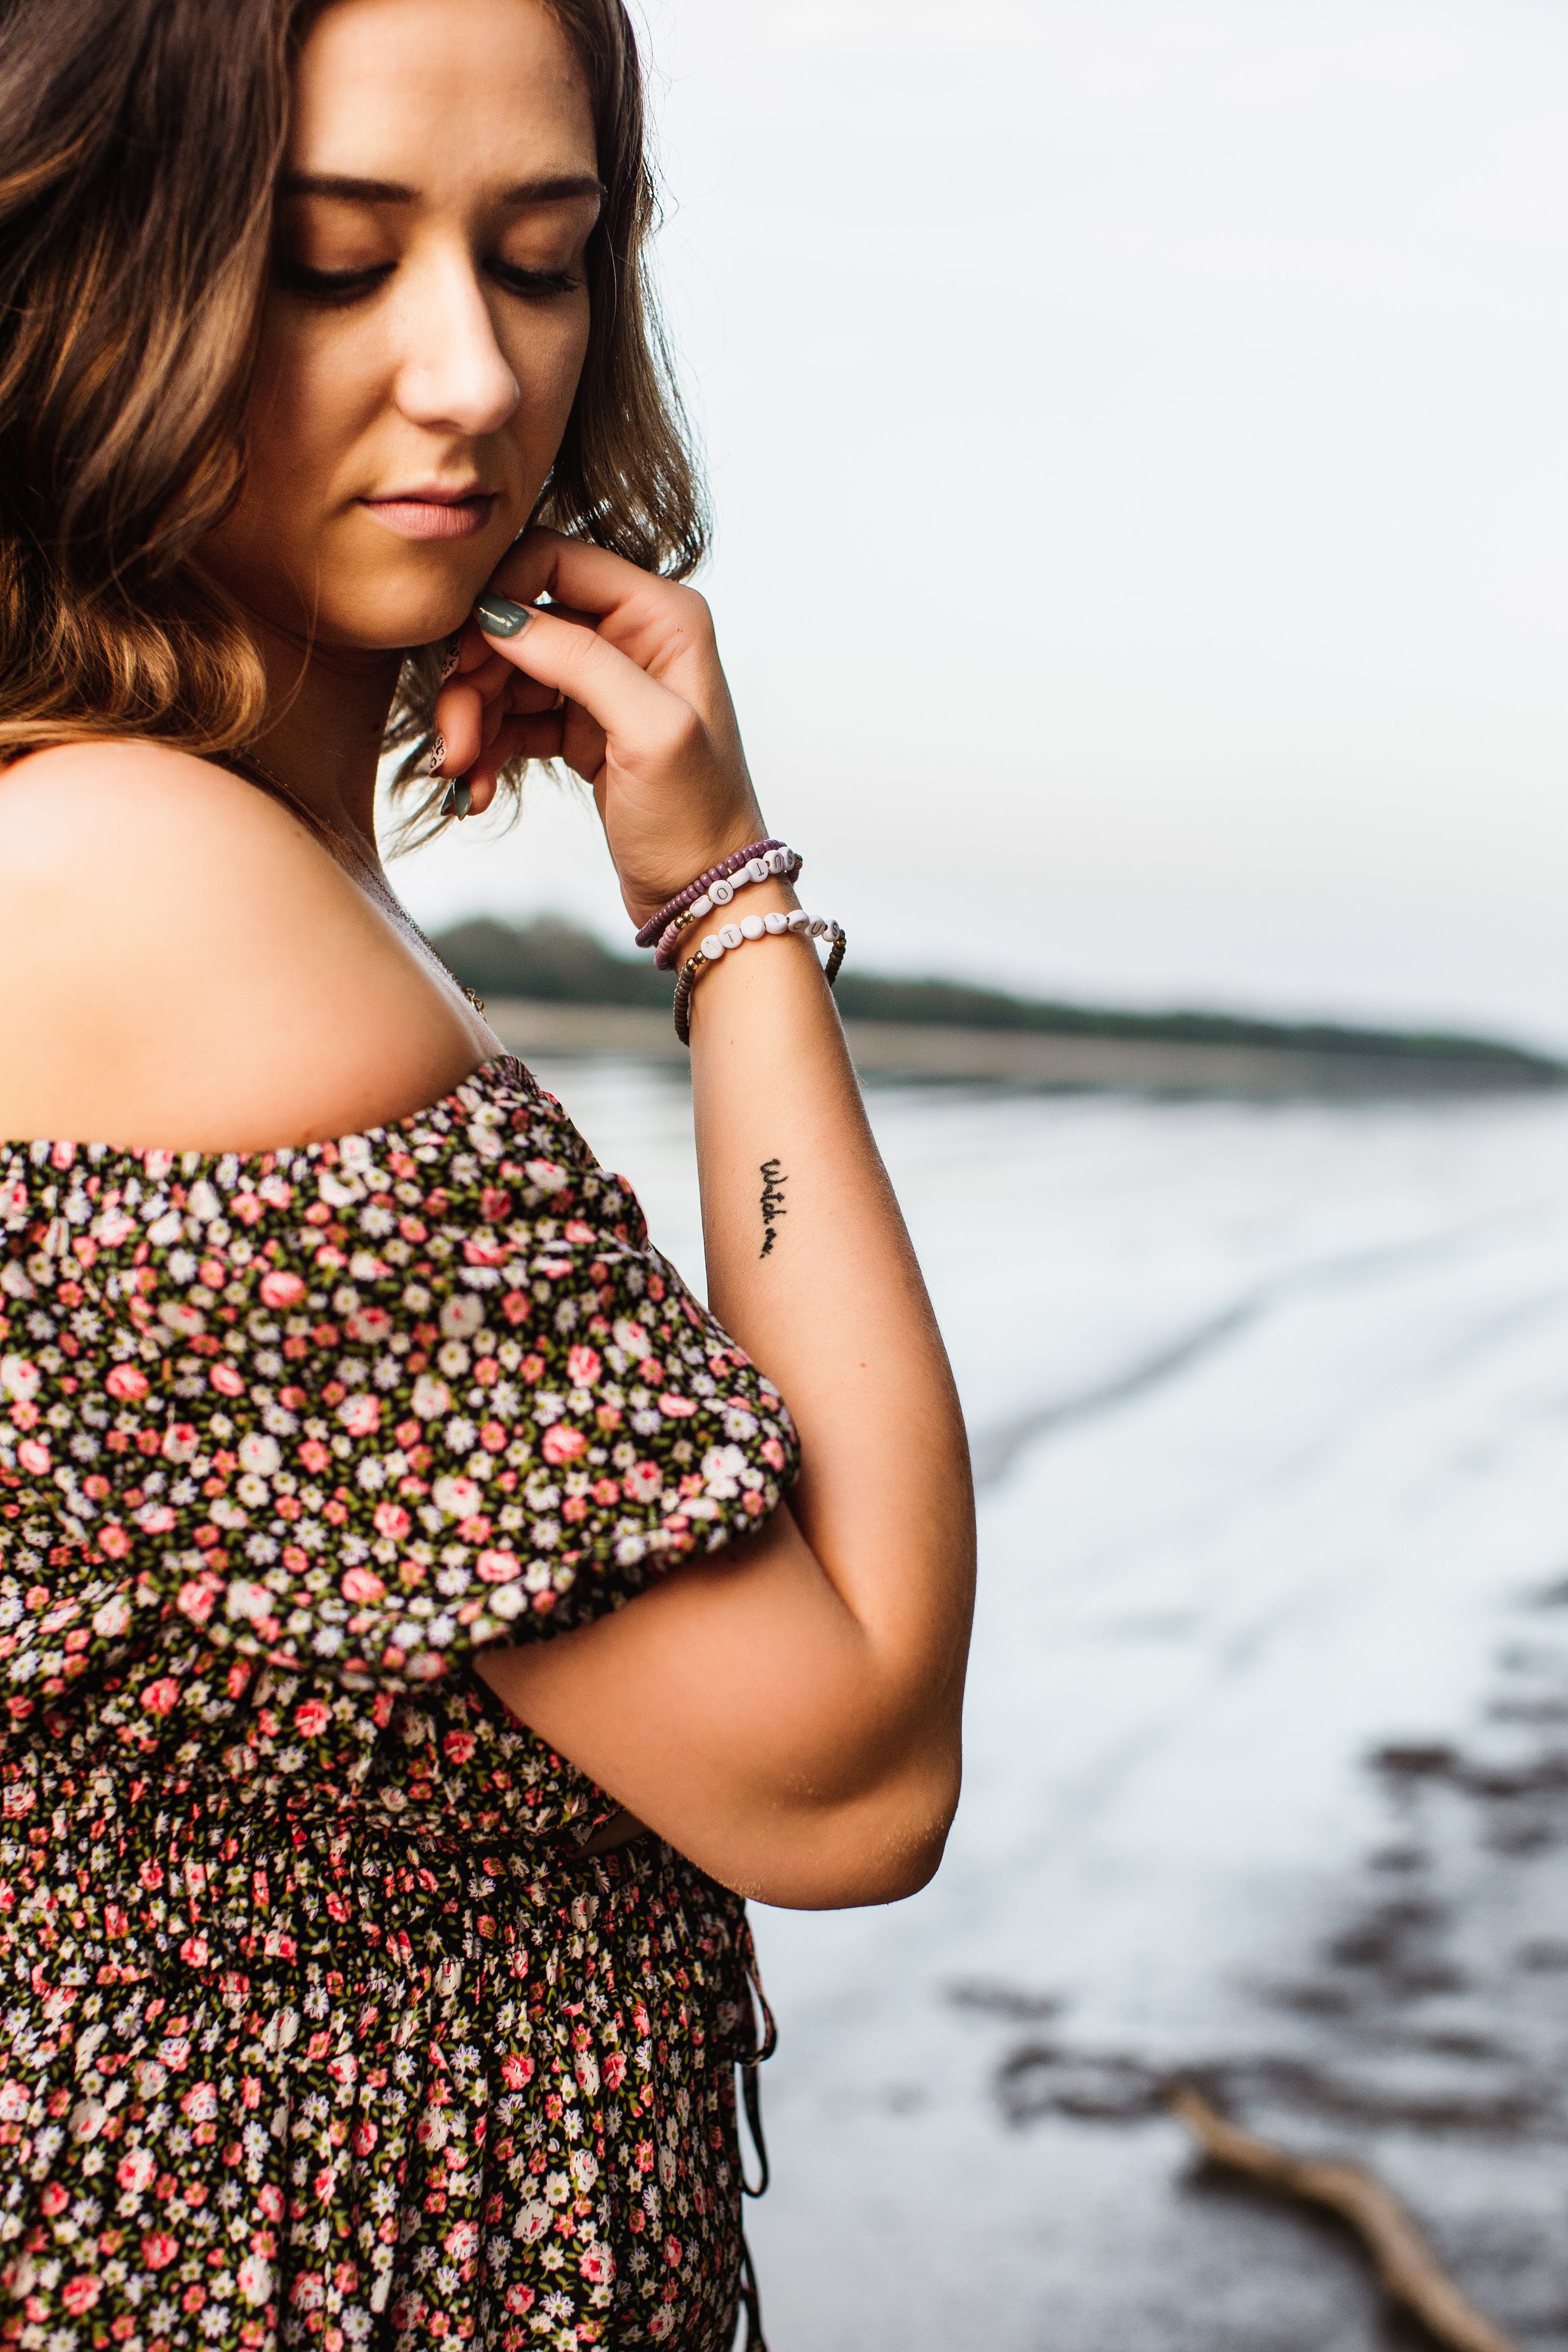  Teala Ward Photography captures a portrait of a mother next to the Illinois River featuring her stunning tattoo. woman portraits #TealaWardPhotography #TealaWardFamilies #IllinoisRiverPhotography #IllinoisFamilyPhotography #familylifestylepics 